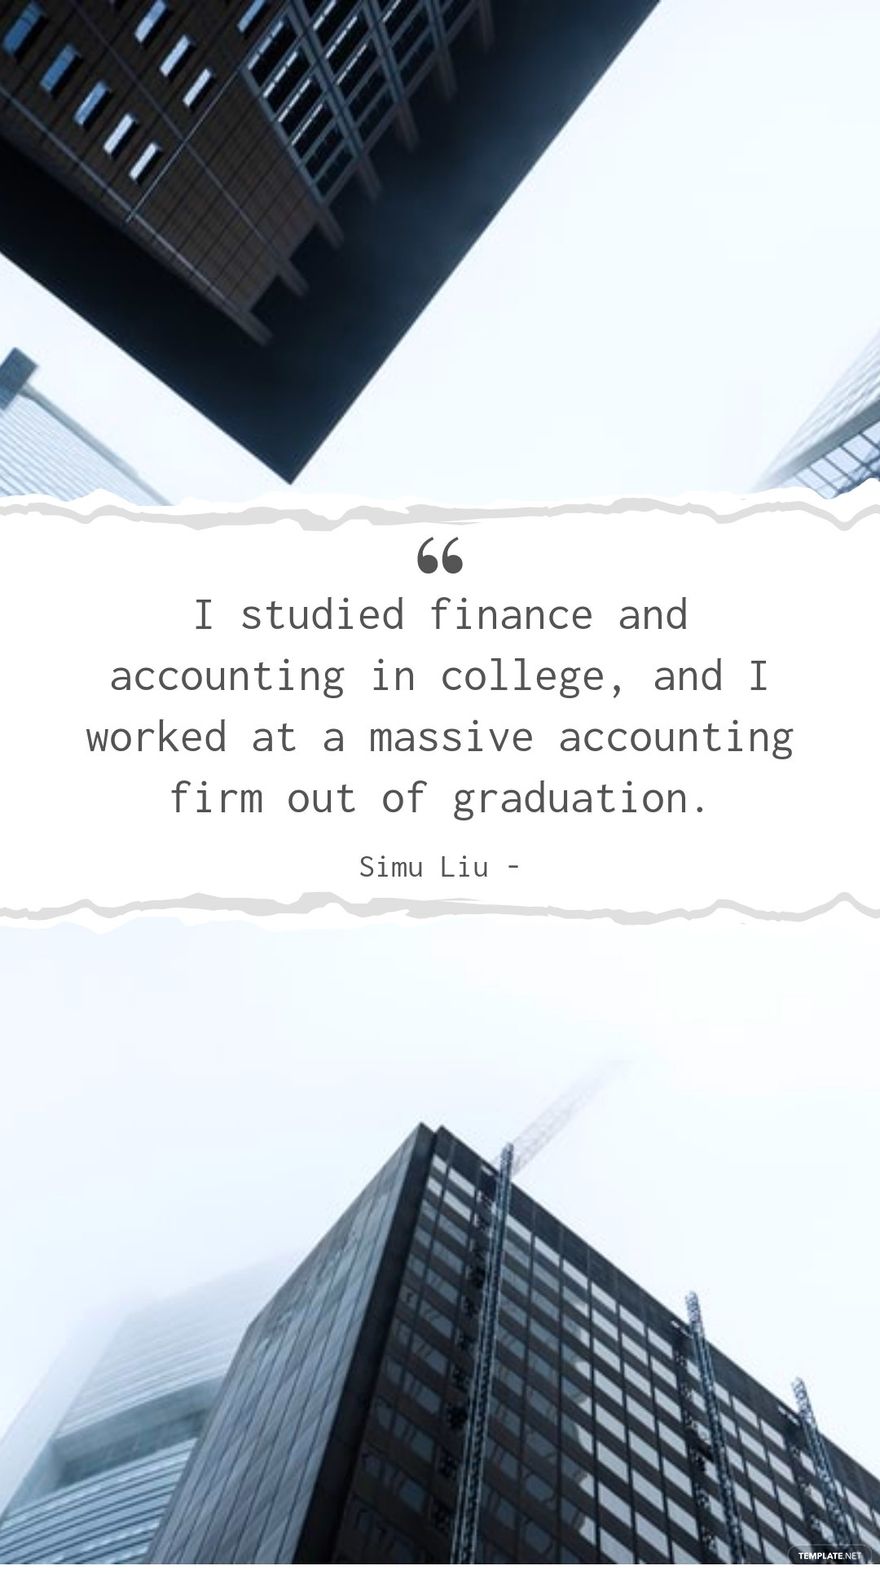 Free Simu Liu - I studied finance and accounting in college, and I worked at a massive accounting firm out of graduation. in JPG